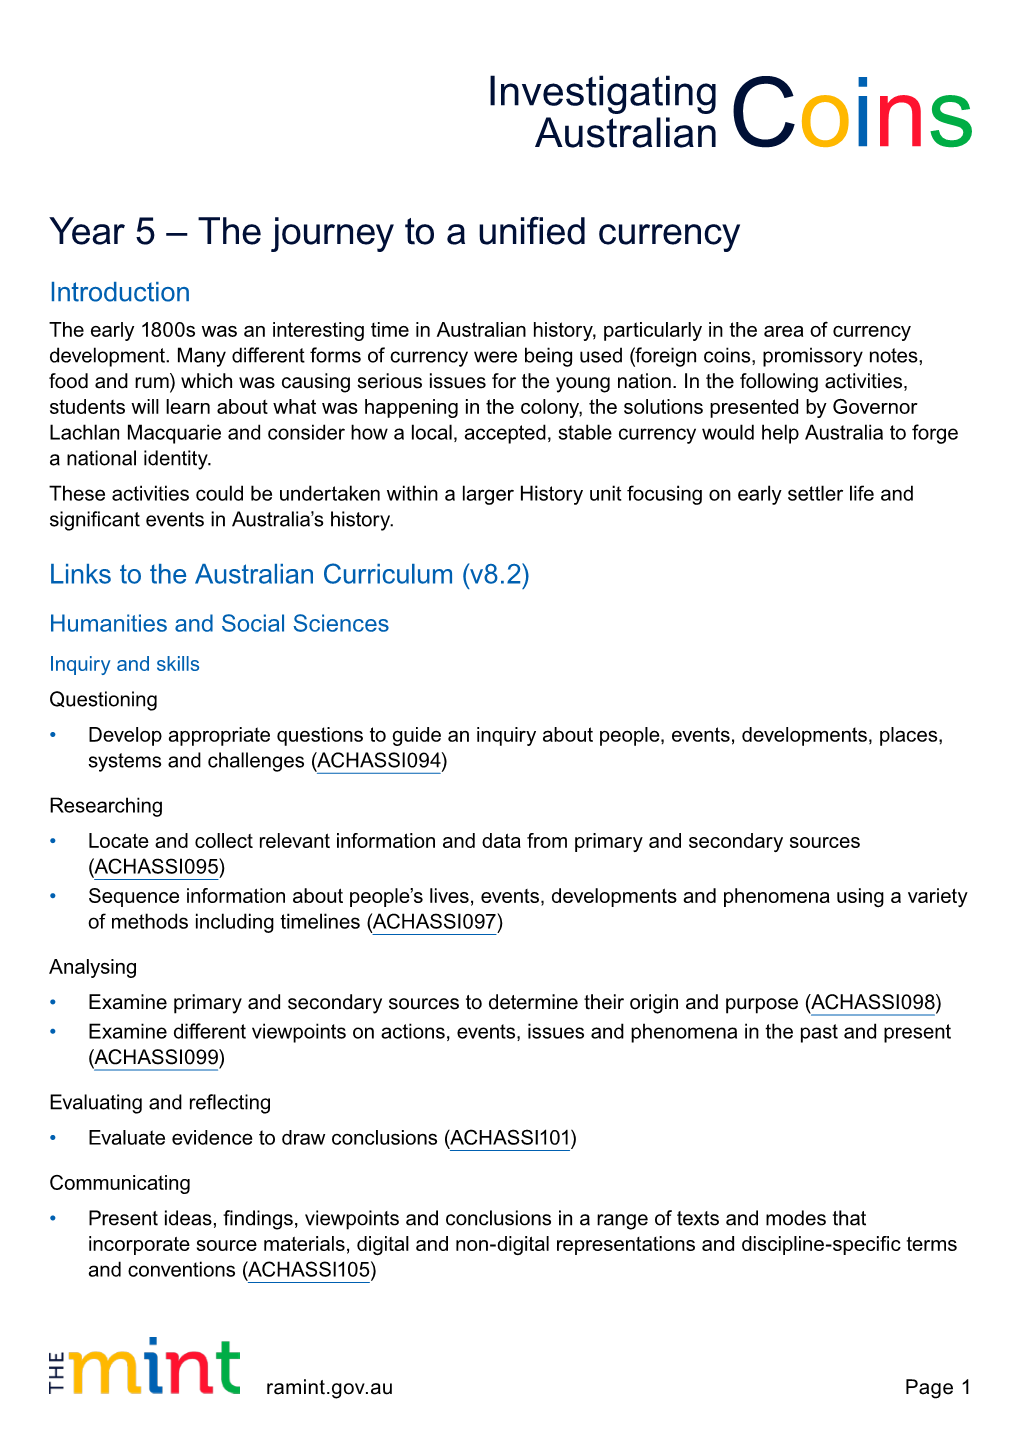 Year 5 – the Journey to a Unified Currency